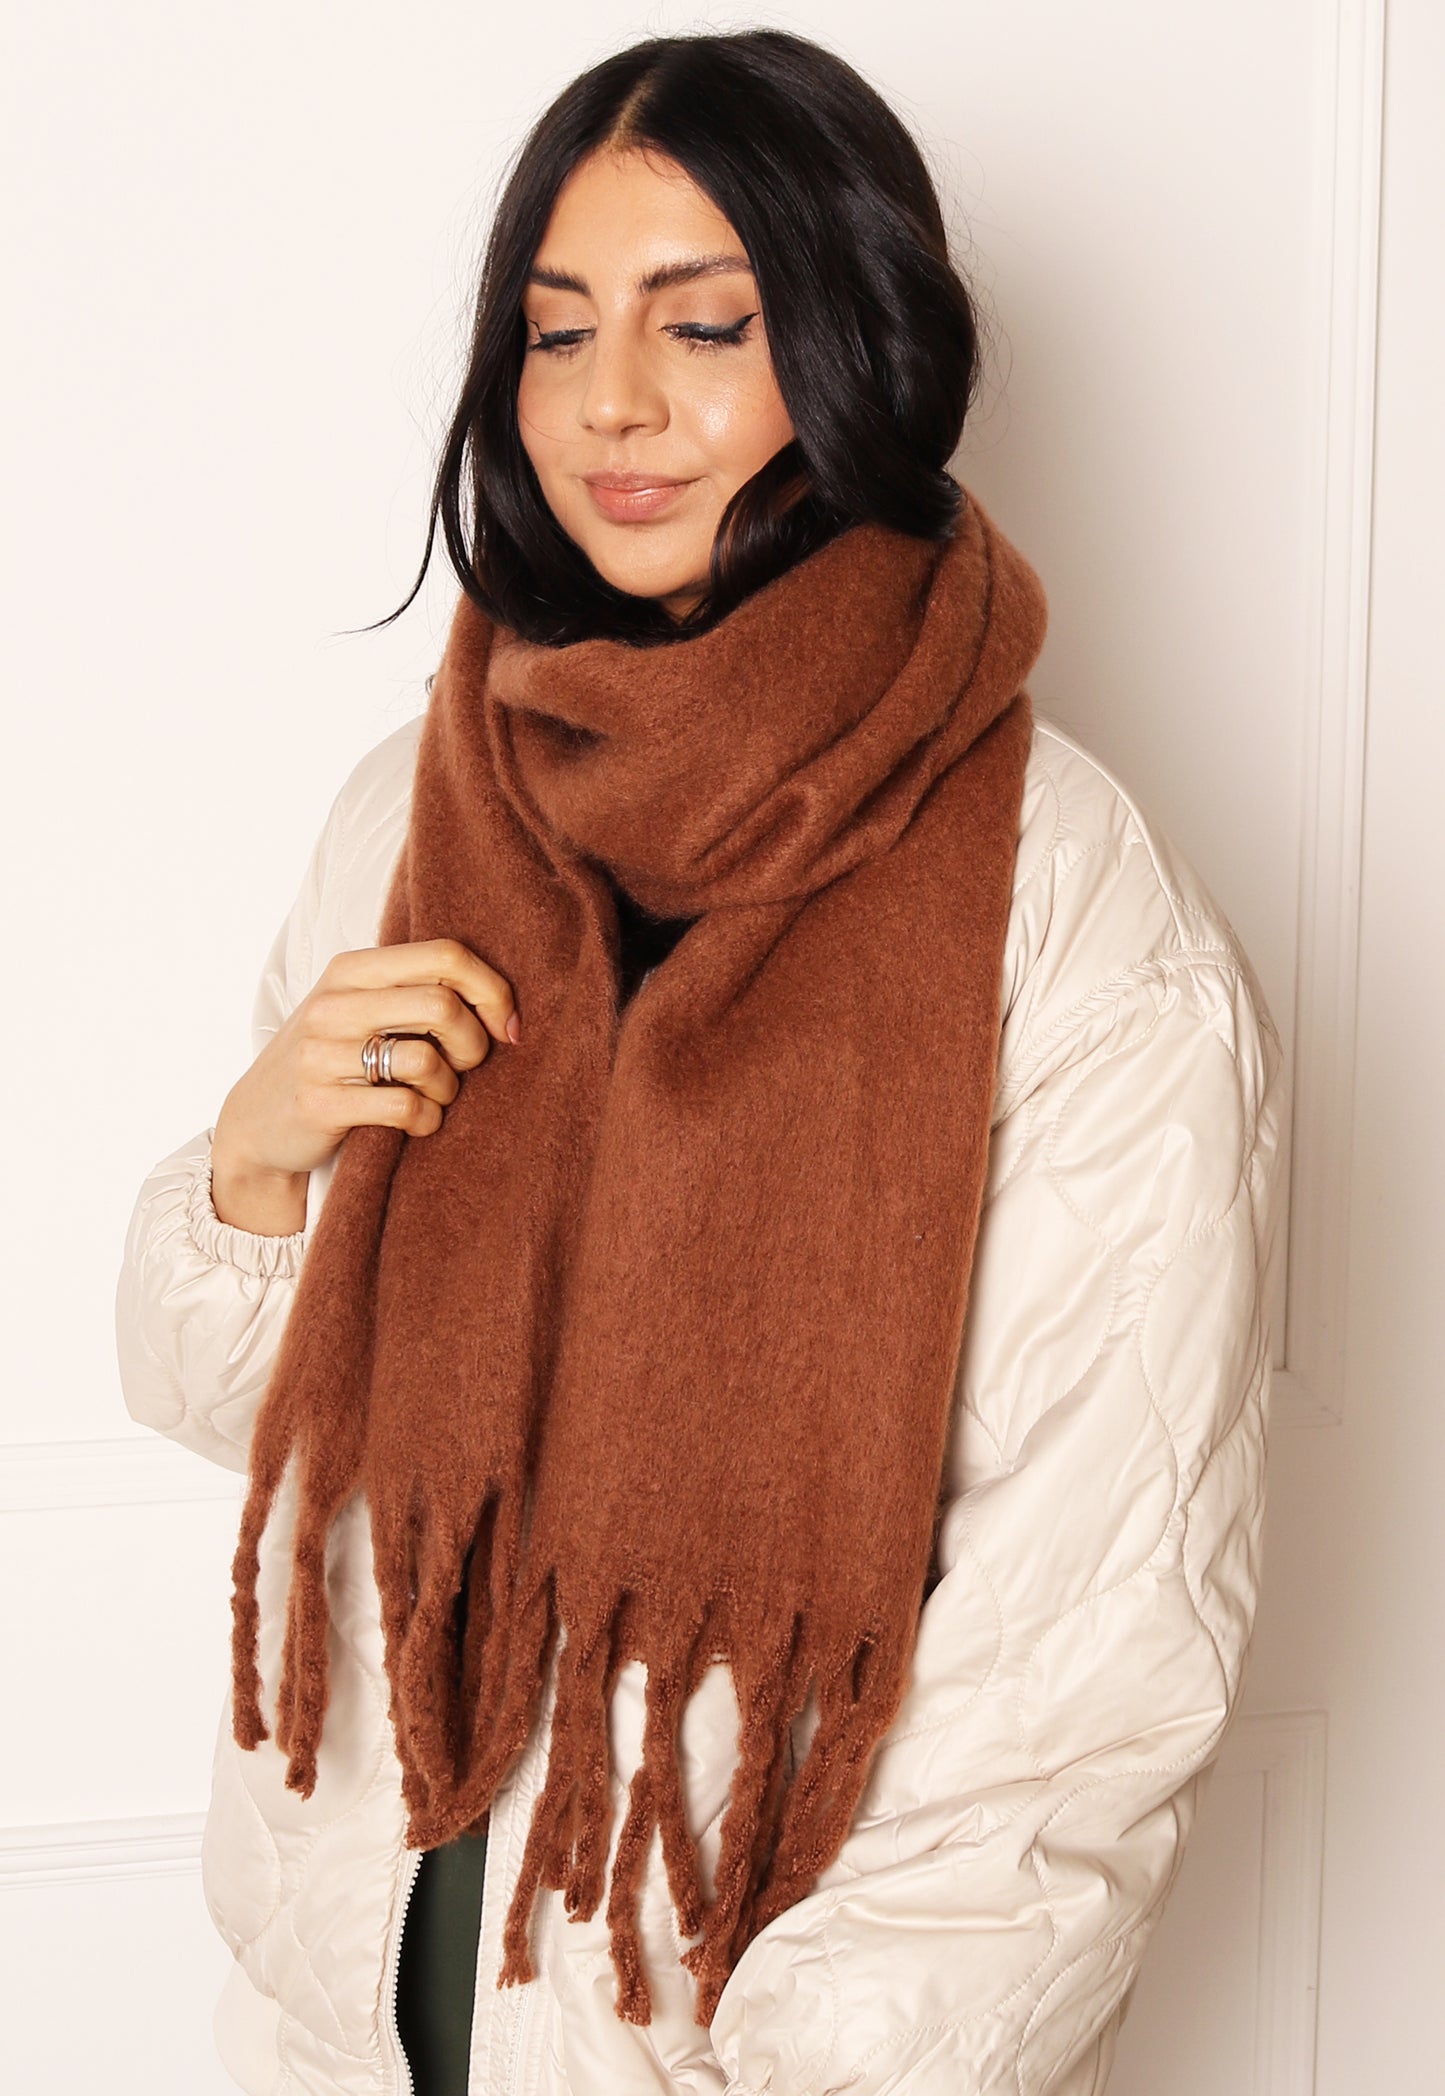 VERO MODA Brushed Scarf with Tassels in Brown - concretebartops